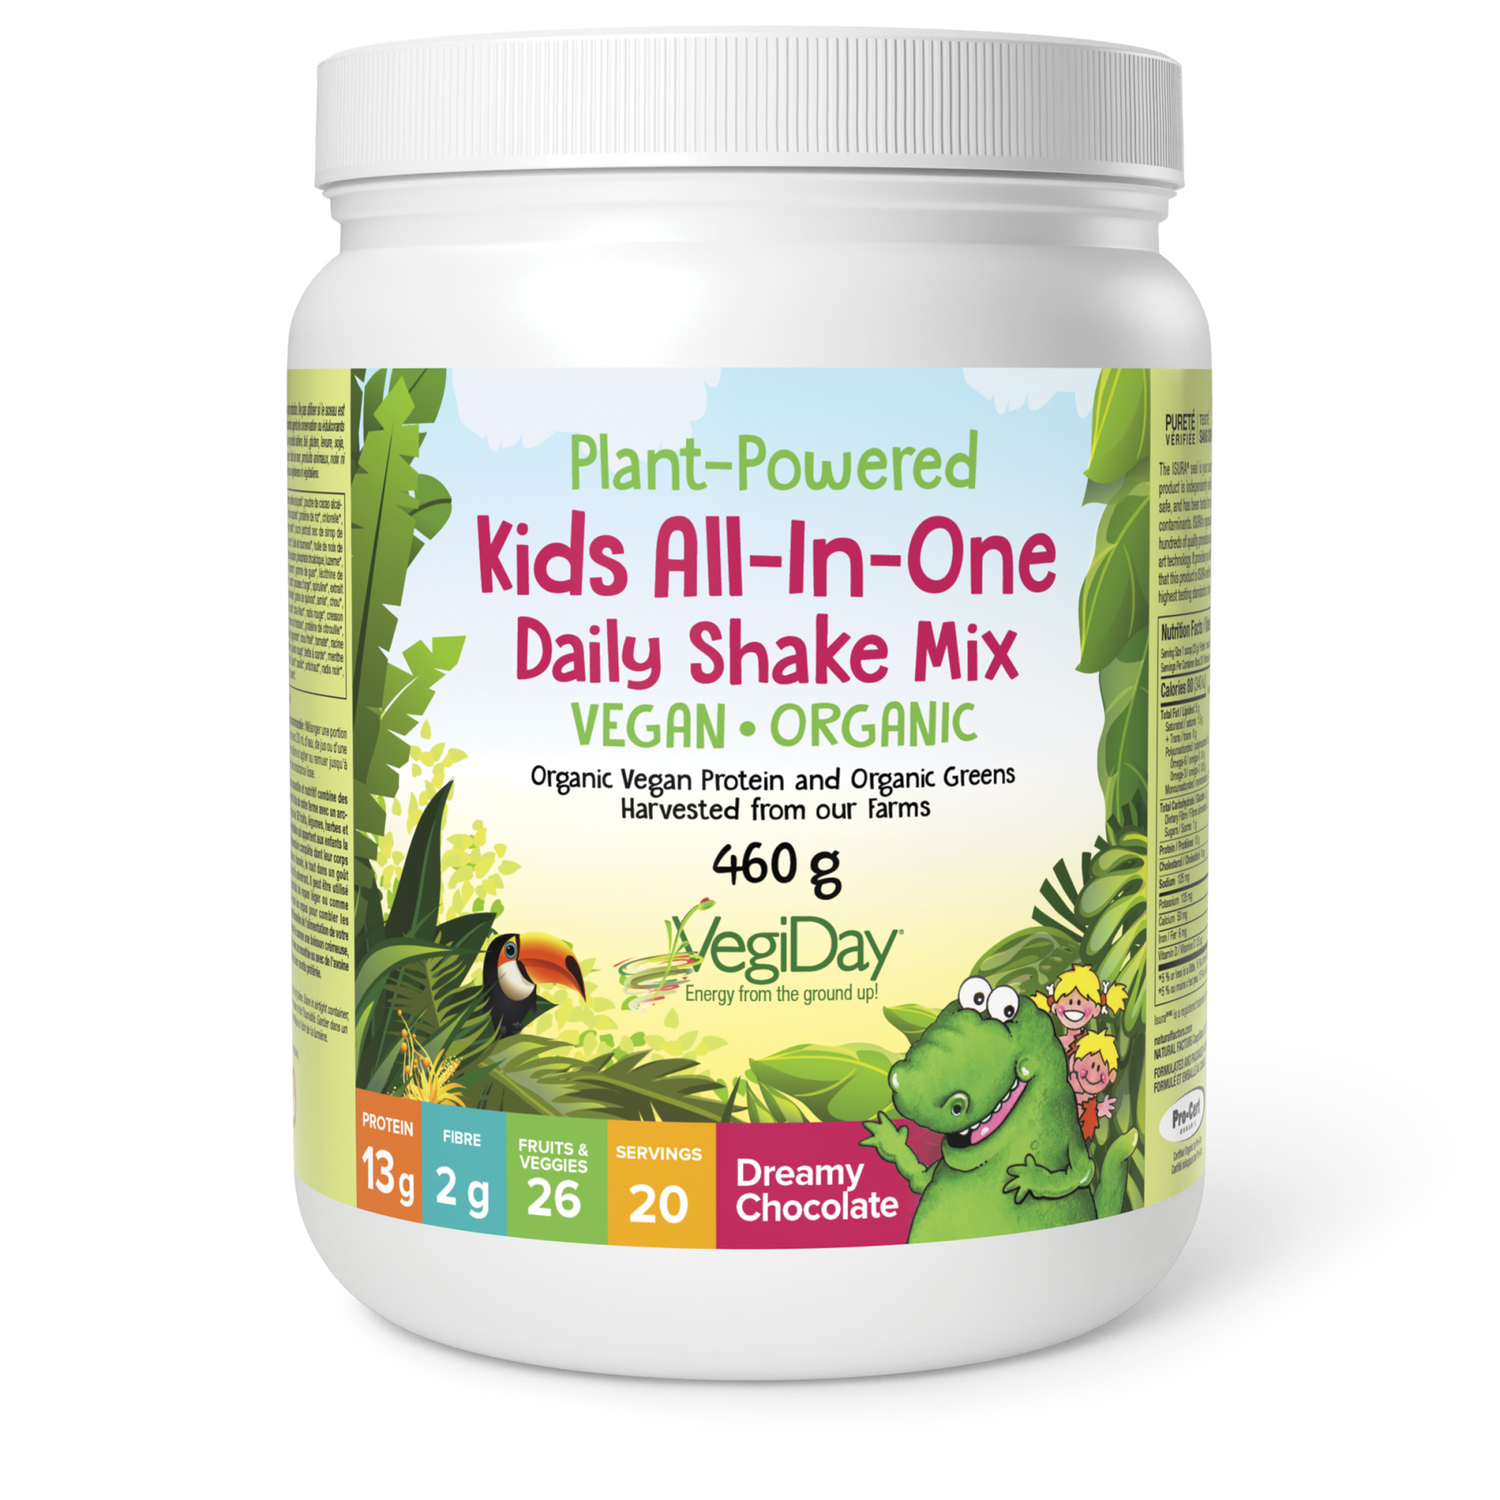 Kids All-In-One Daily Shake Mix, Dreamy Chocolate, Natural Factors|v|image|2971